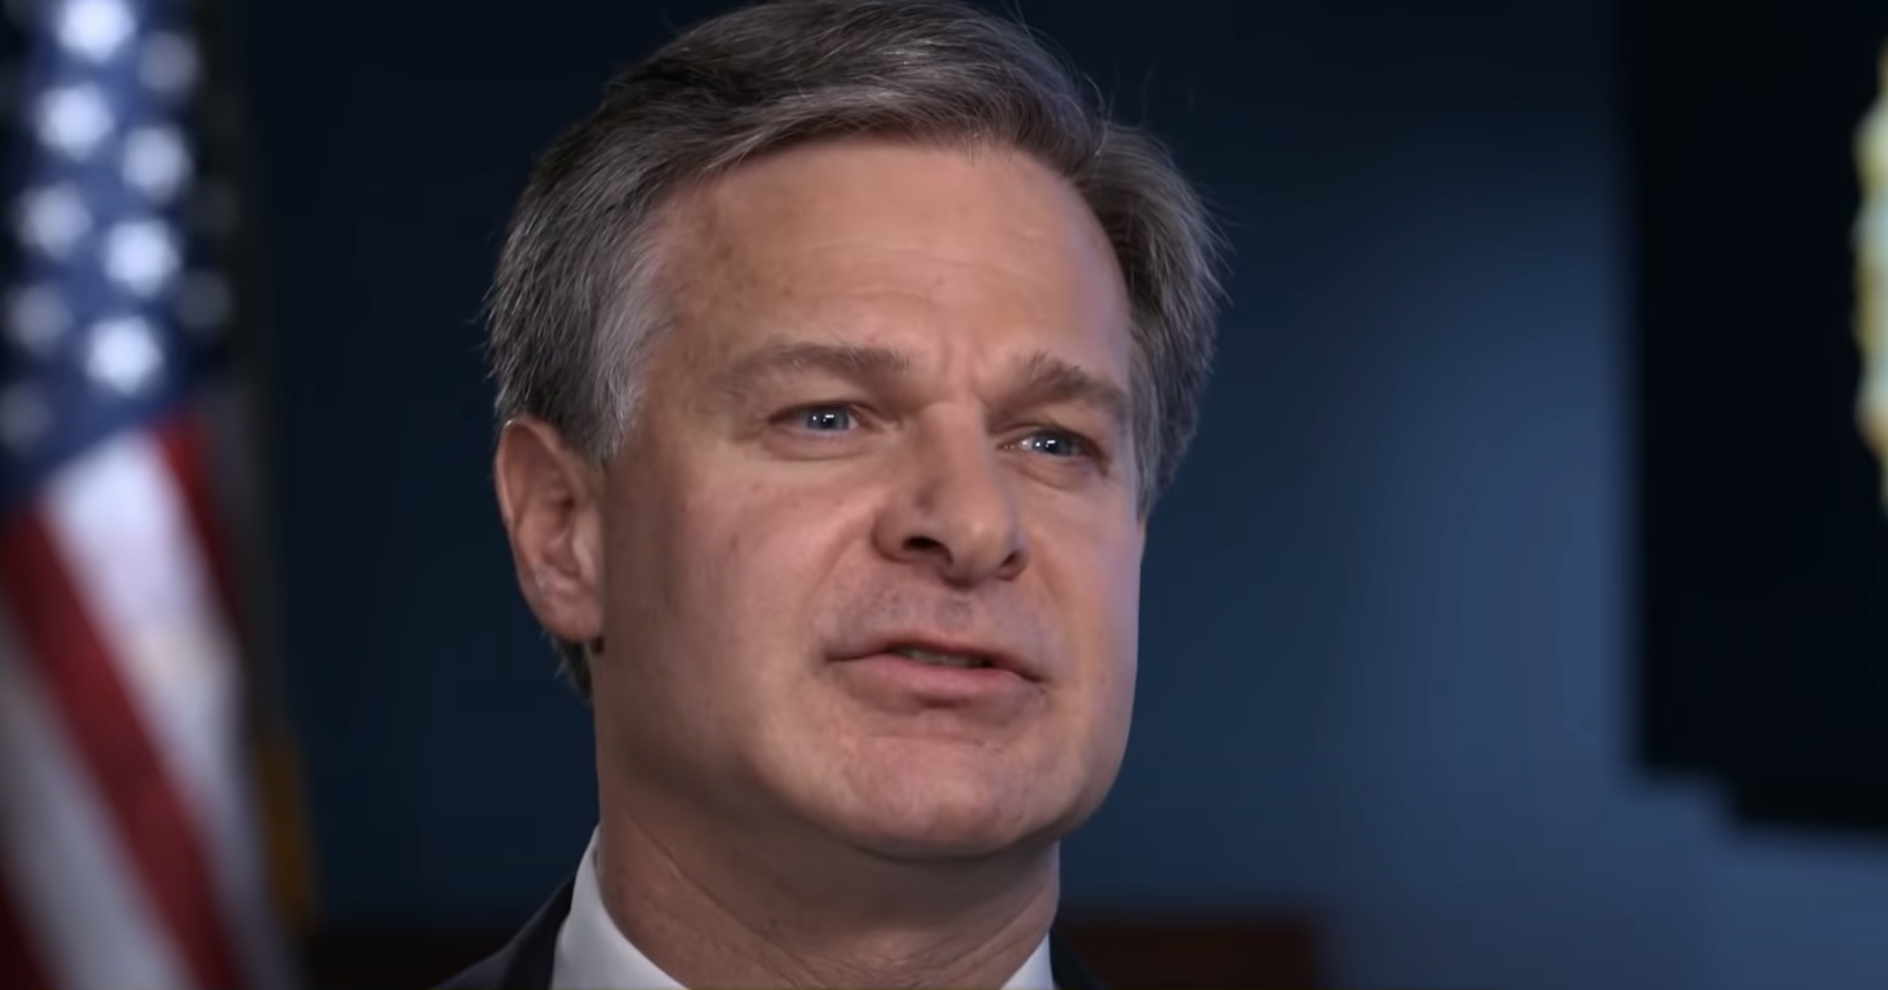 Key Questions for FBI Director Wray by the House Judiciary Committee